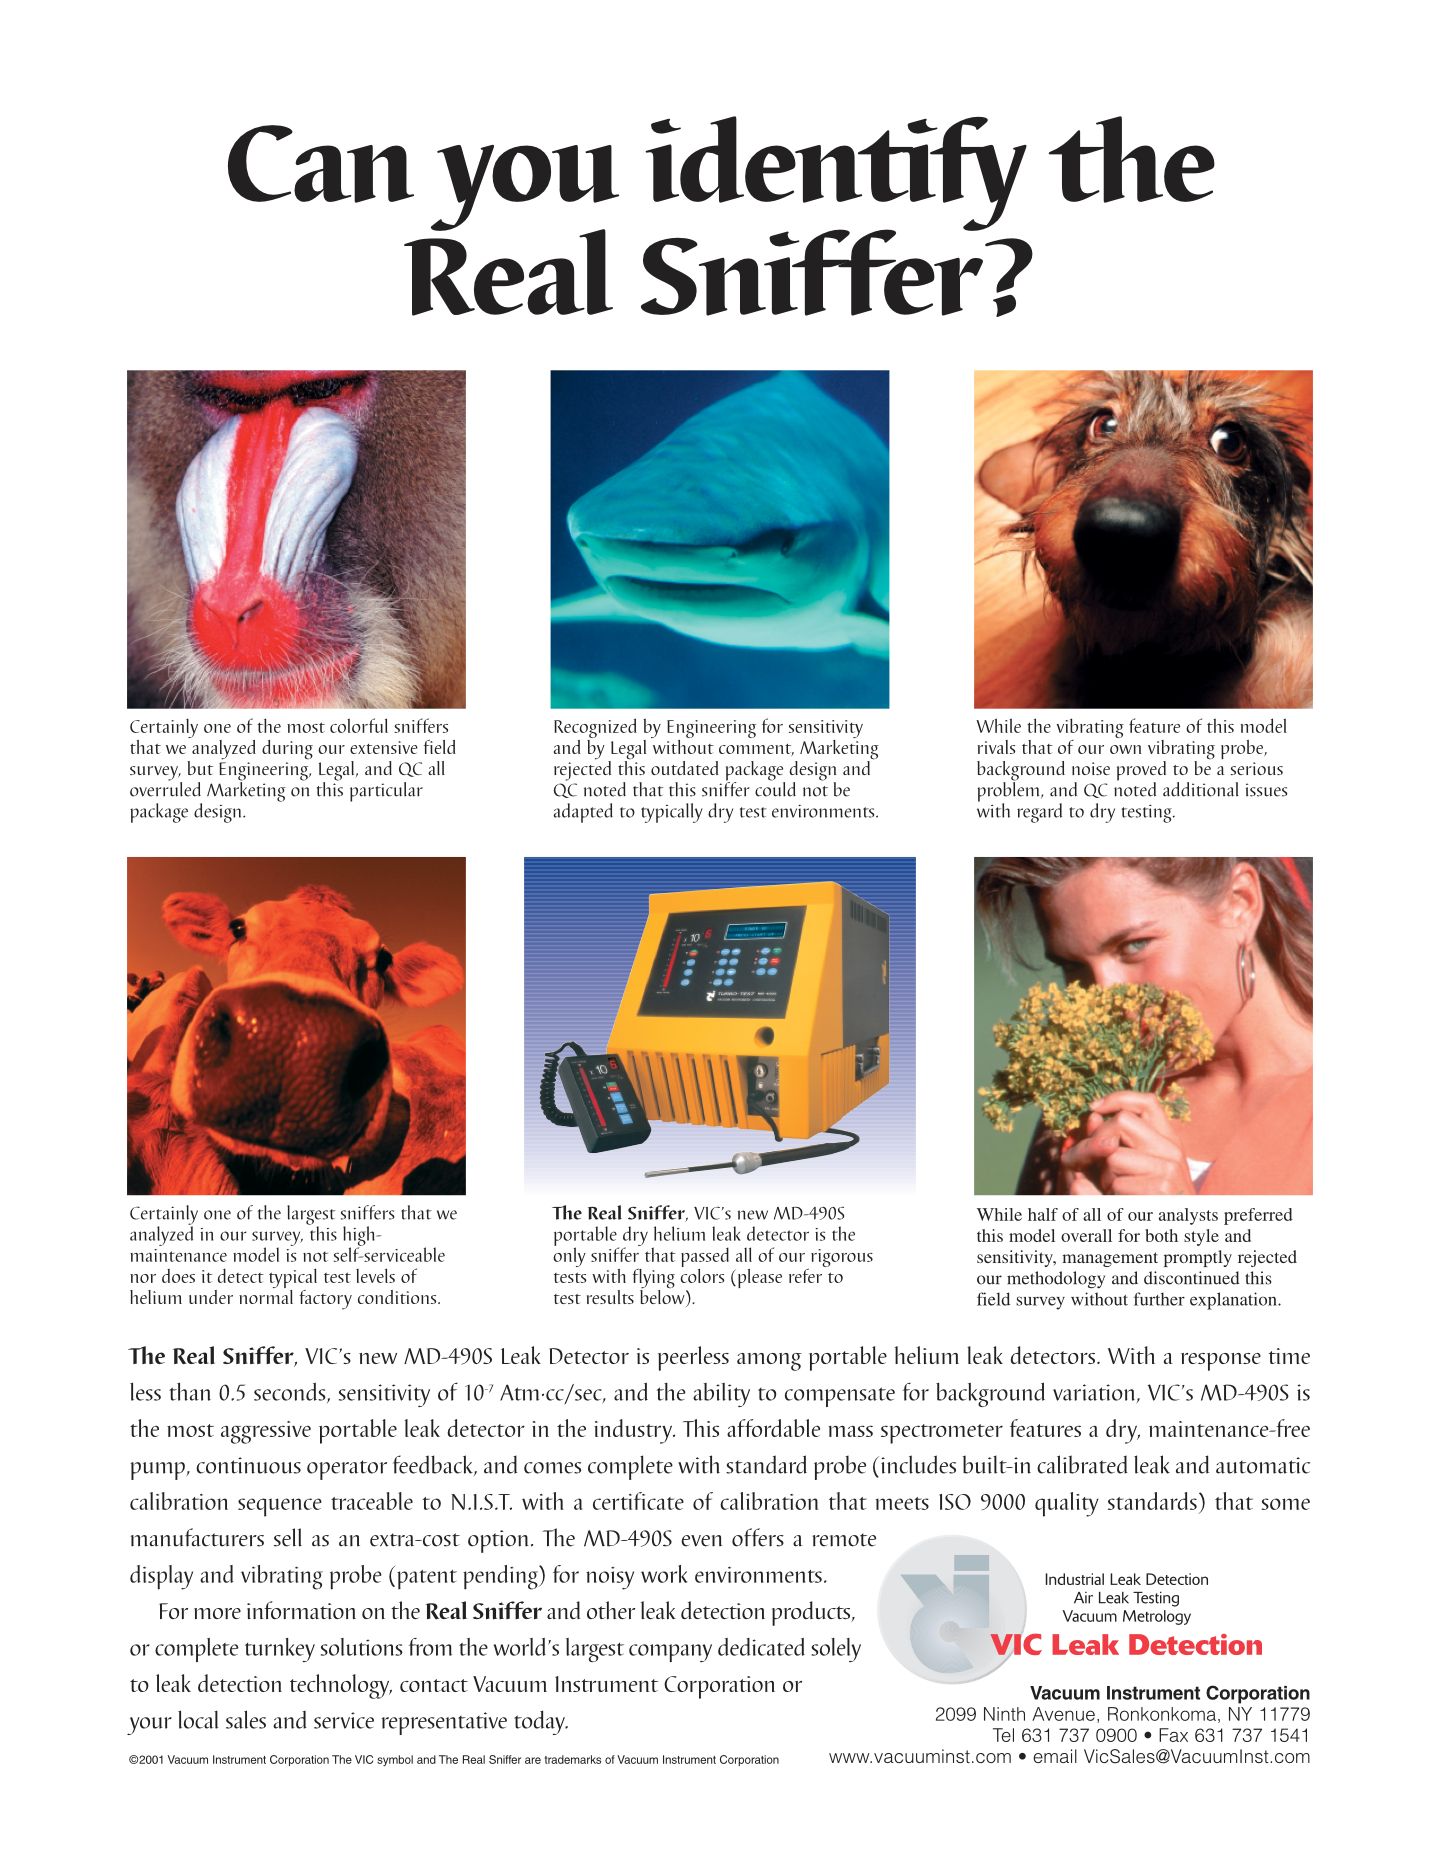 Image of a full-page print ad with the headline “Can you identify the Real Sniffer?” followed by a matrix of six photos, all but one of which prominently features a nose. There is a big red and white nose on a hairy primate, a shark, a cute little puppy, a cow, and a woman sniffing wildflowers. Among these images is a product photo of a portable industrial sniffing leak detector. All six photos have humorous captions that are too small to read on screen.